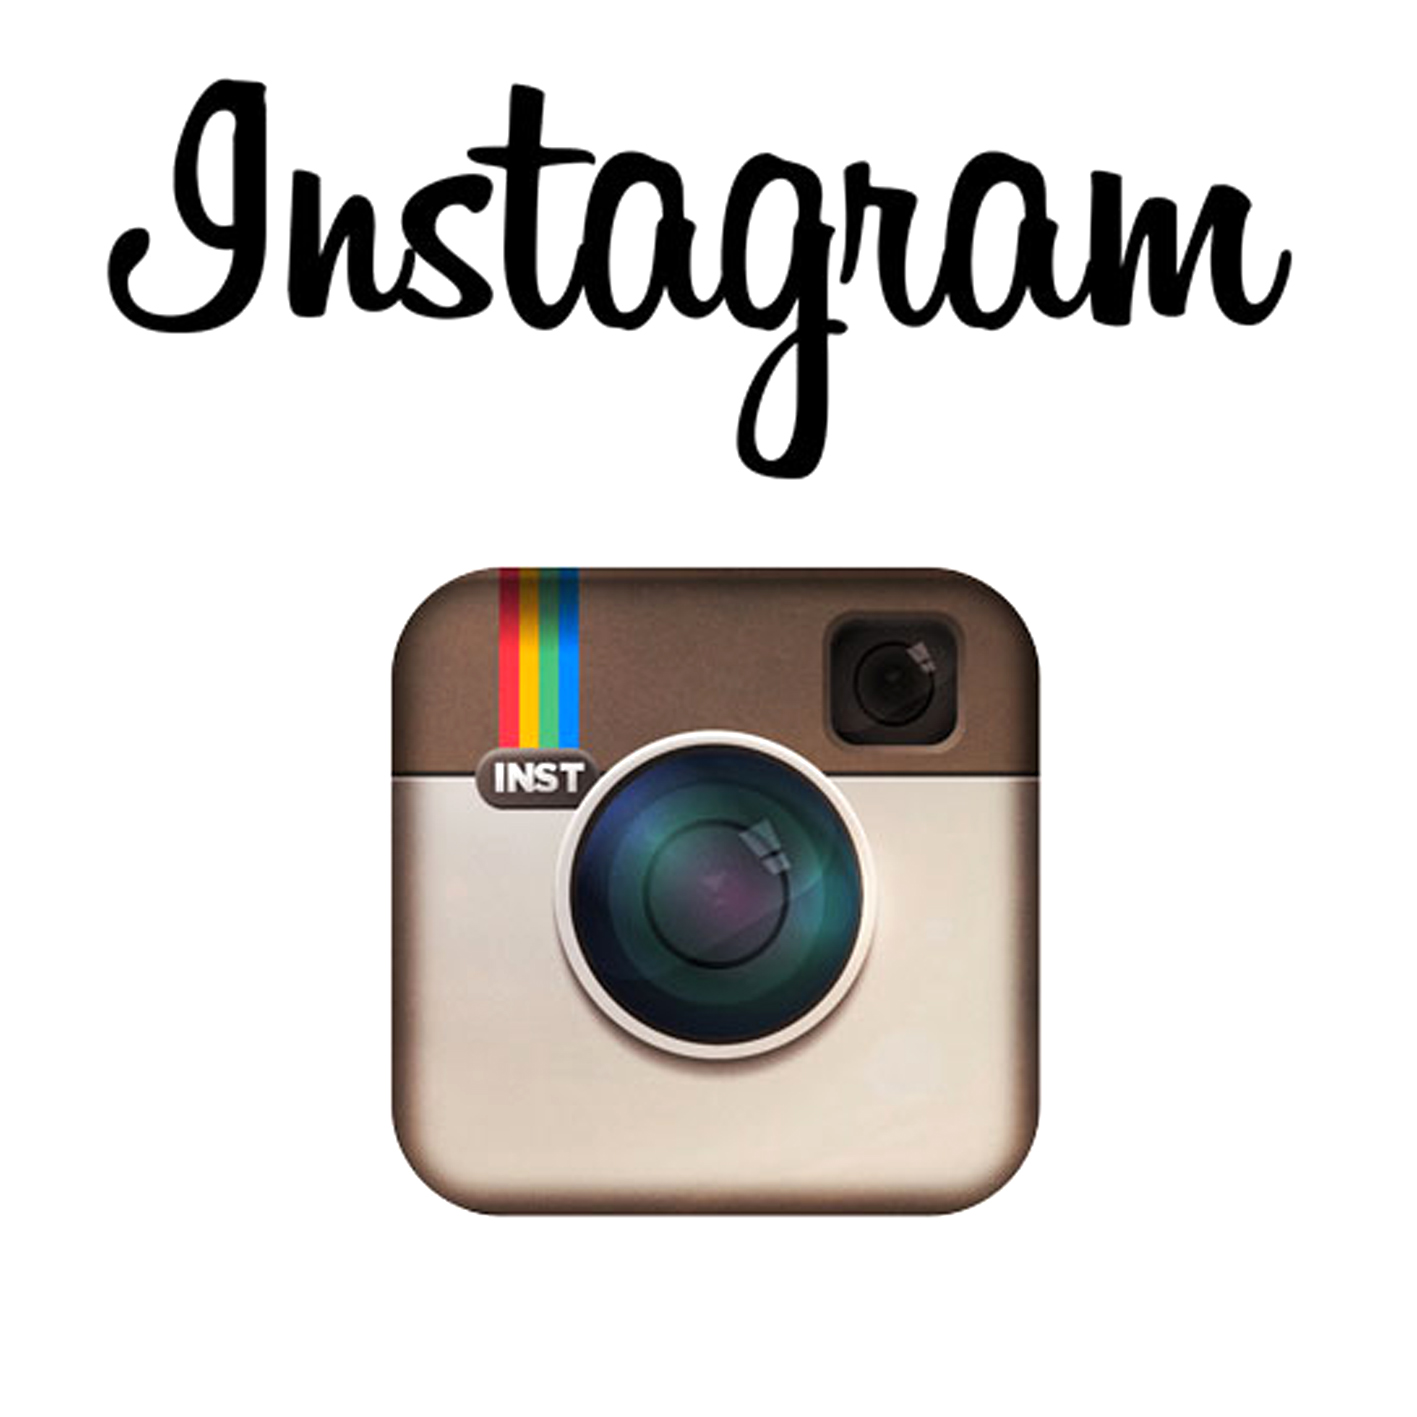 How to Use Two Instagram Accounts on a Single Device